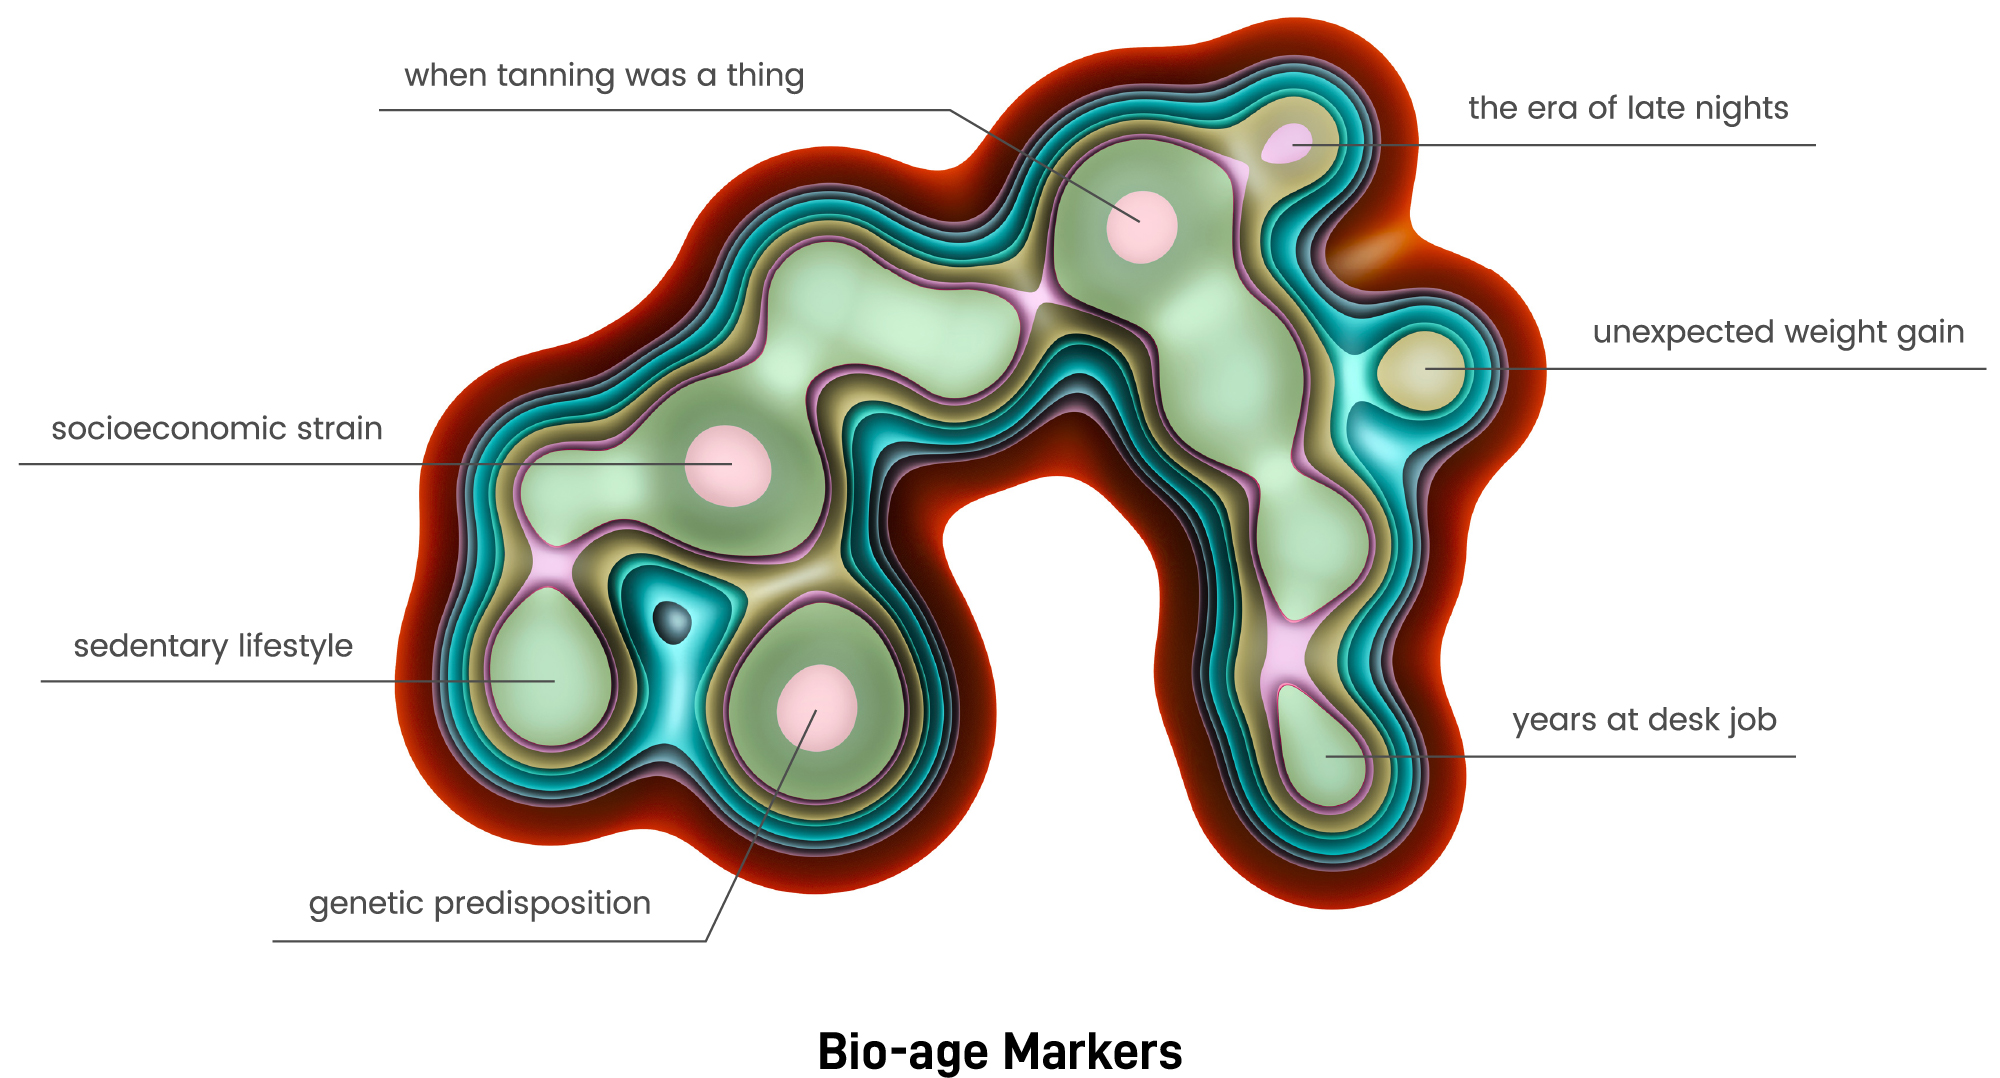 Cross-section diagram in deep red, turquoise, and sage green. It describes things that affect bio-age: tanning, partying, sitting at a desk, weight gain, genetics, sedentary, and socioeconomic strain. 